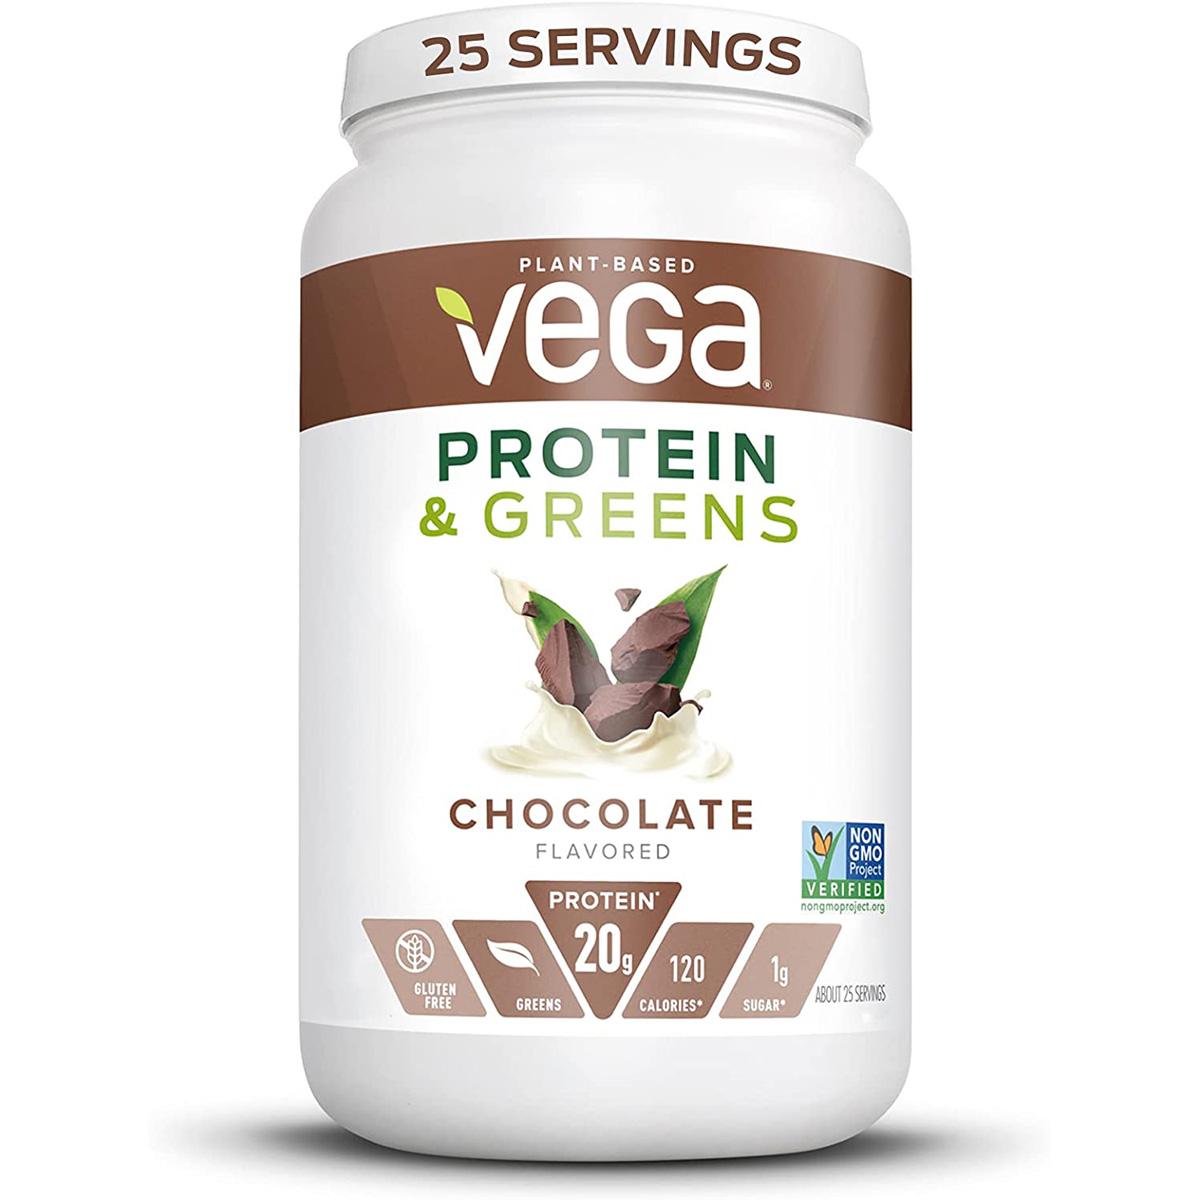 Vega Protein and Greens Chocolate Vegan Protein Powder for $17.03 Shipped